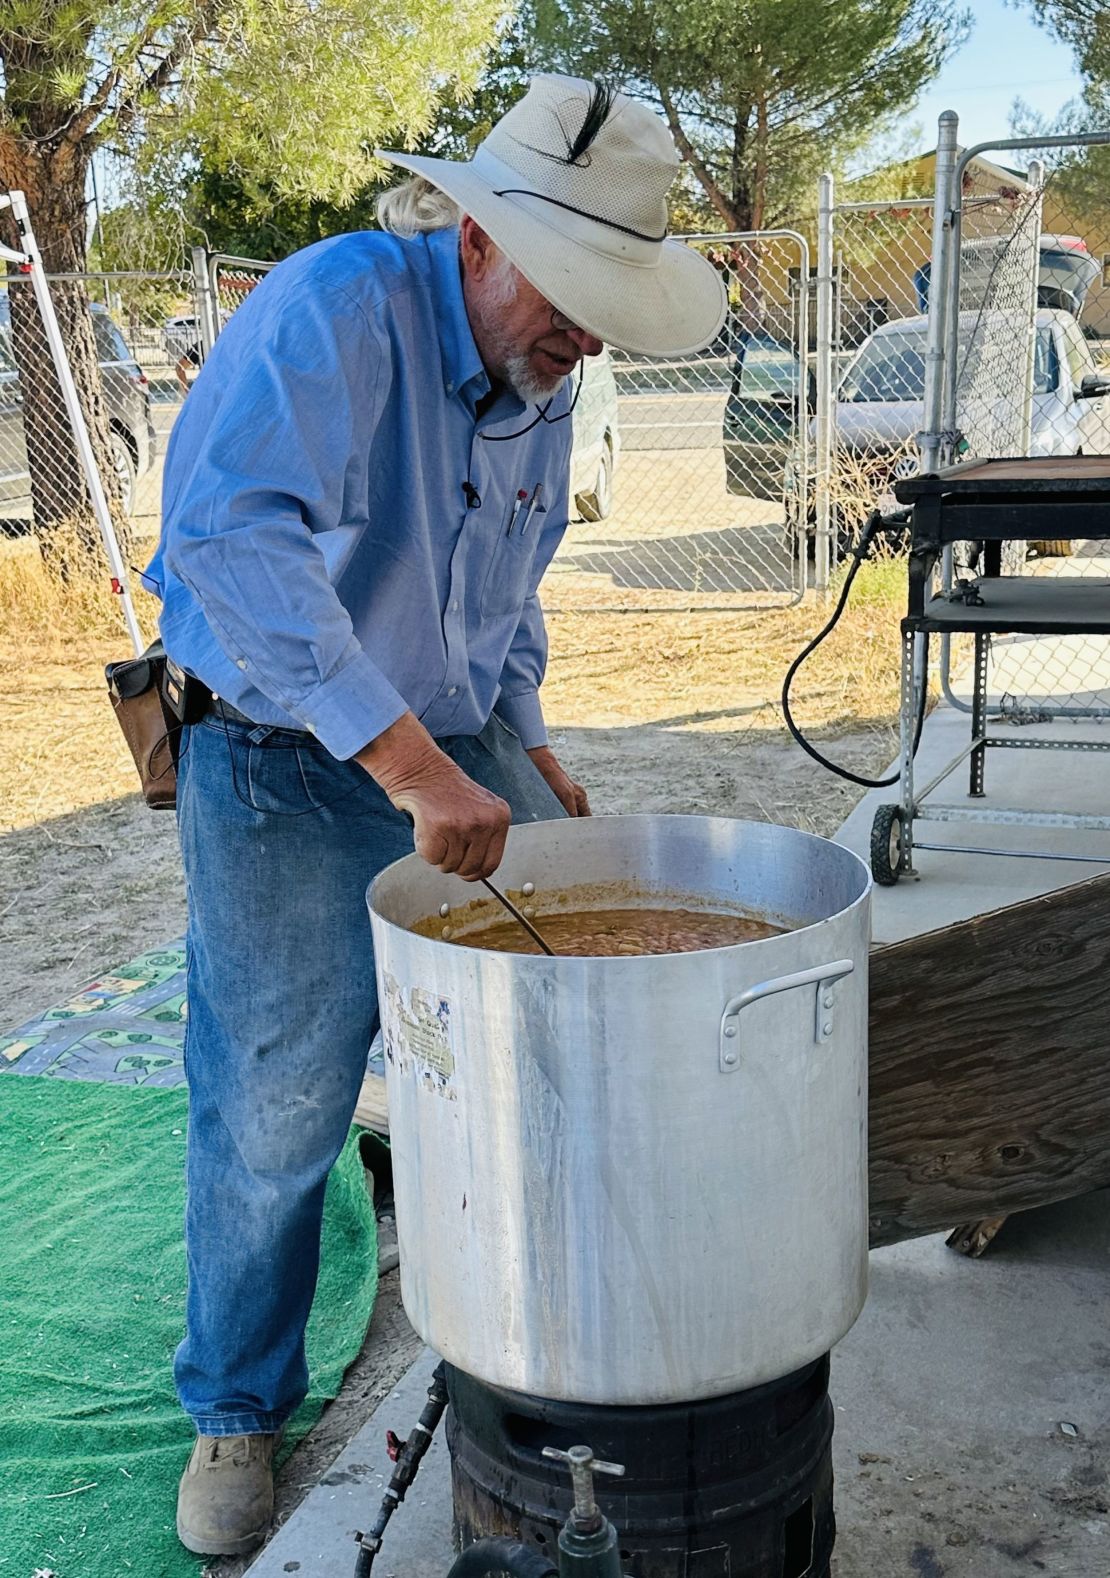 Sam Schultz prepares food for migrants in a makeshift kitchen. Migrants wait in camp sites along the U.S./Mexico border to be processed by U.S. Border Protection authorities to request asylum.